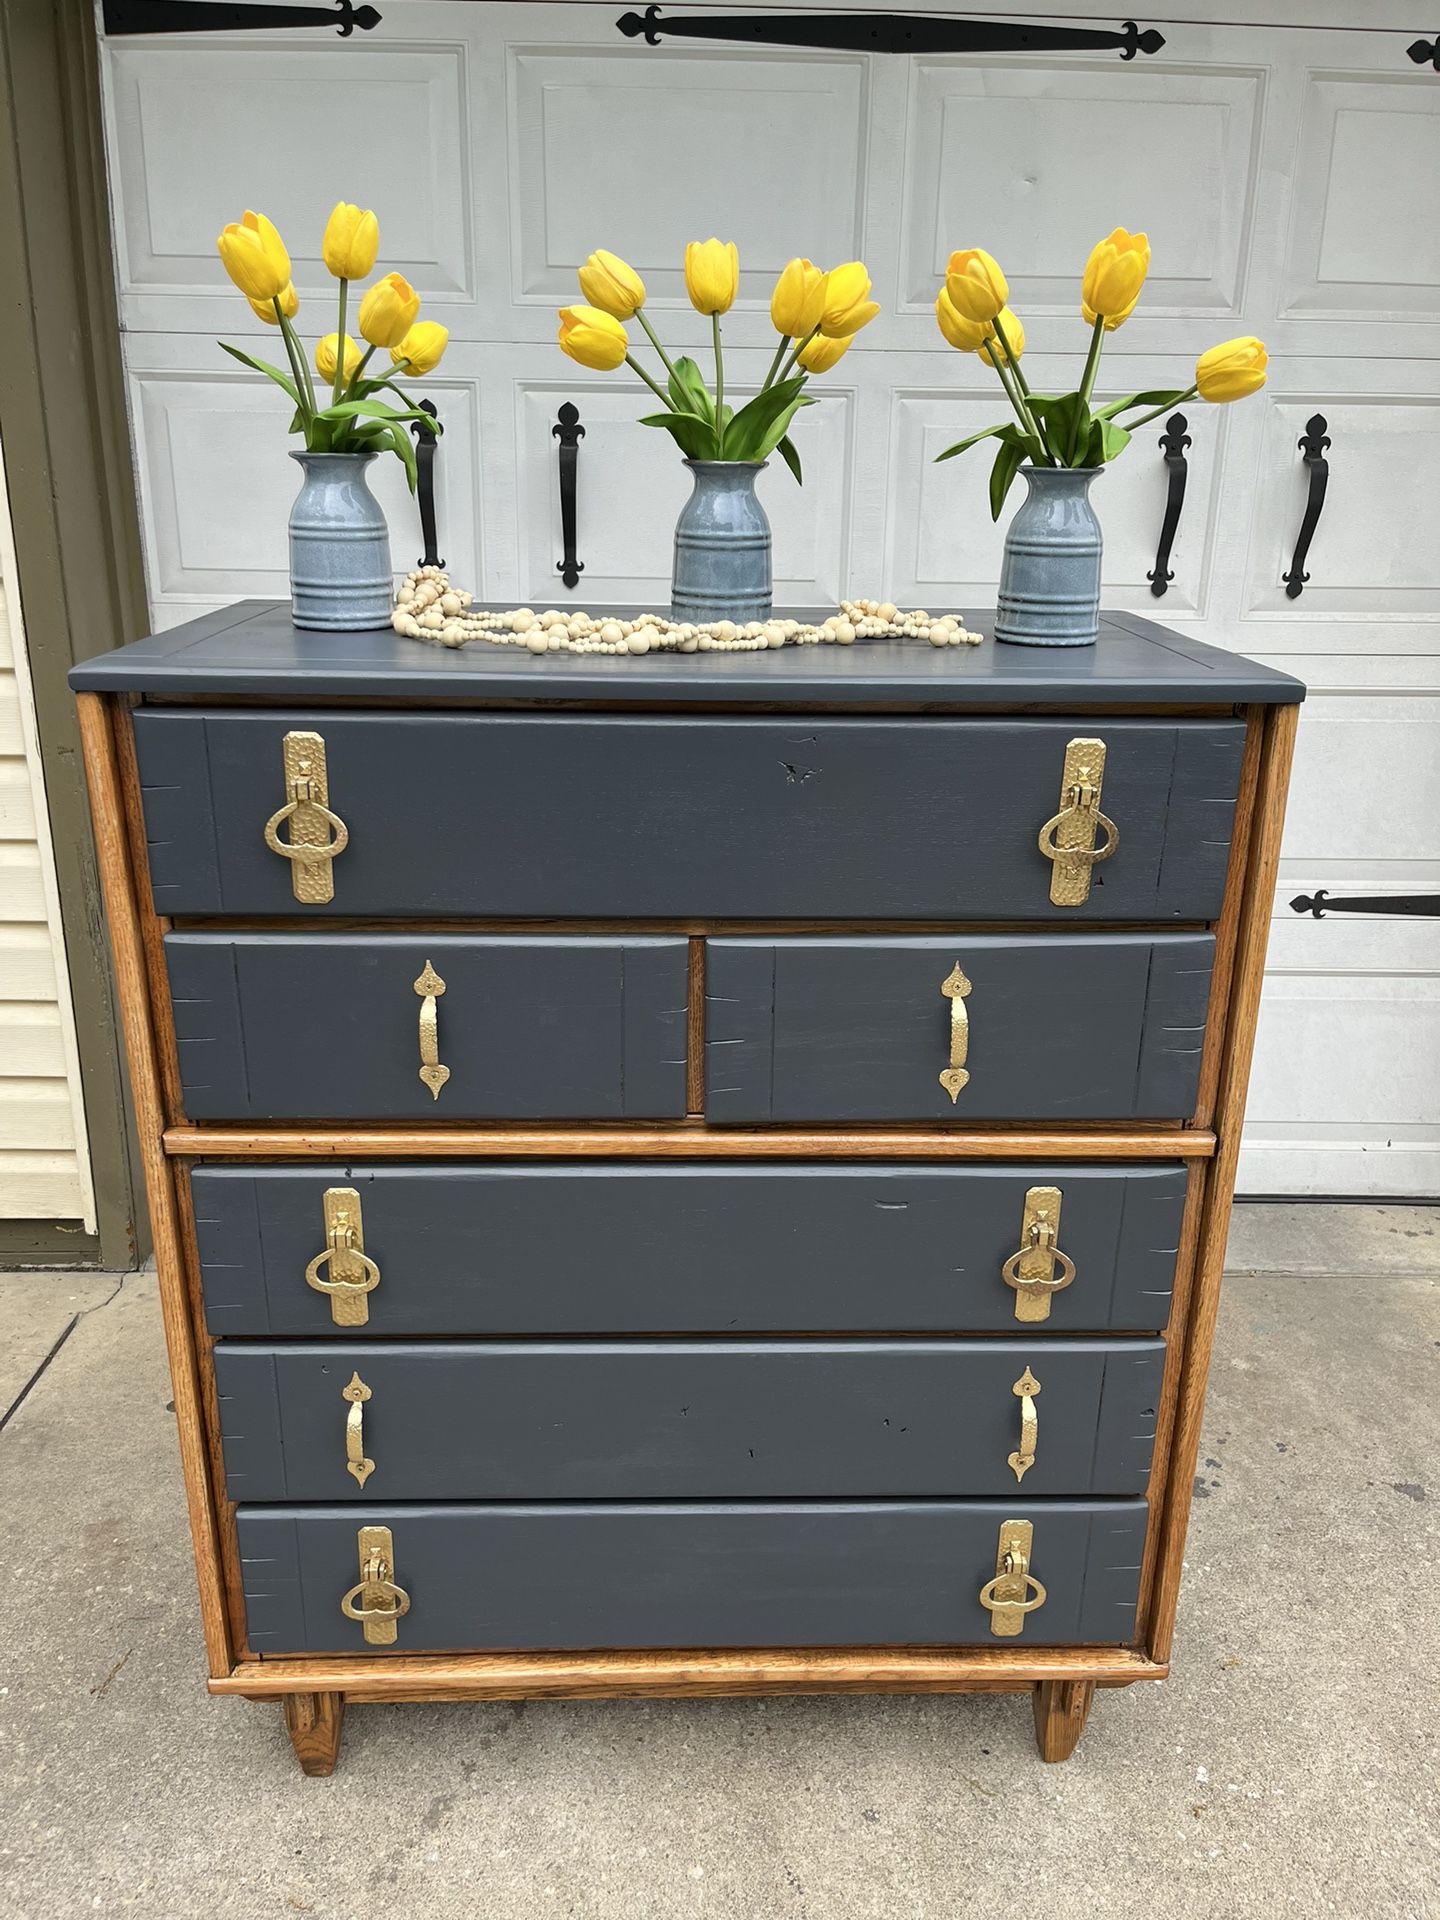 Tall Dresser Painted In Navy Blue With Gold Handles. 